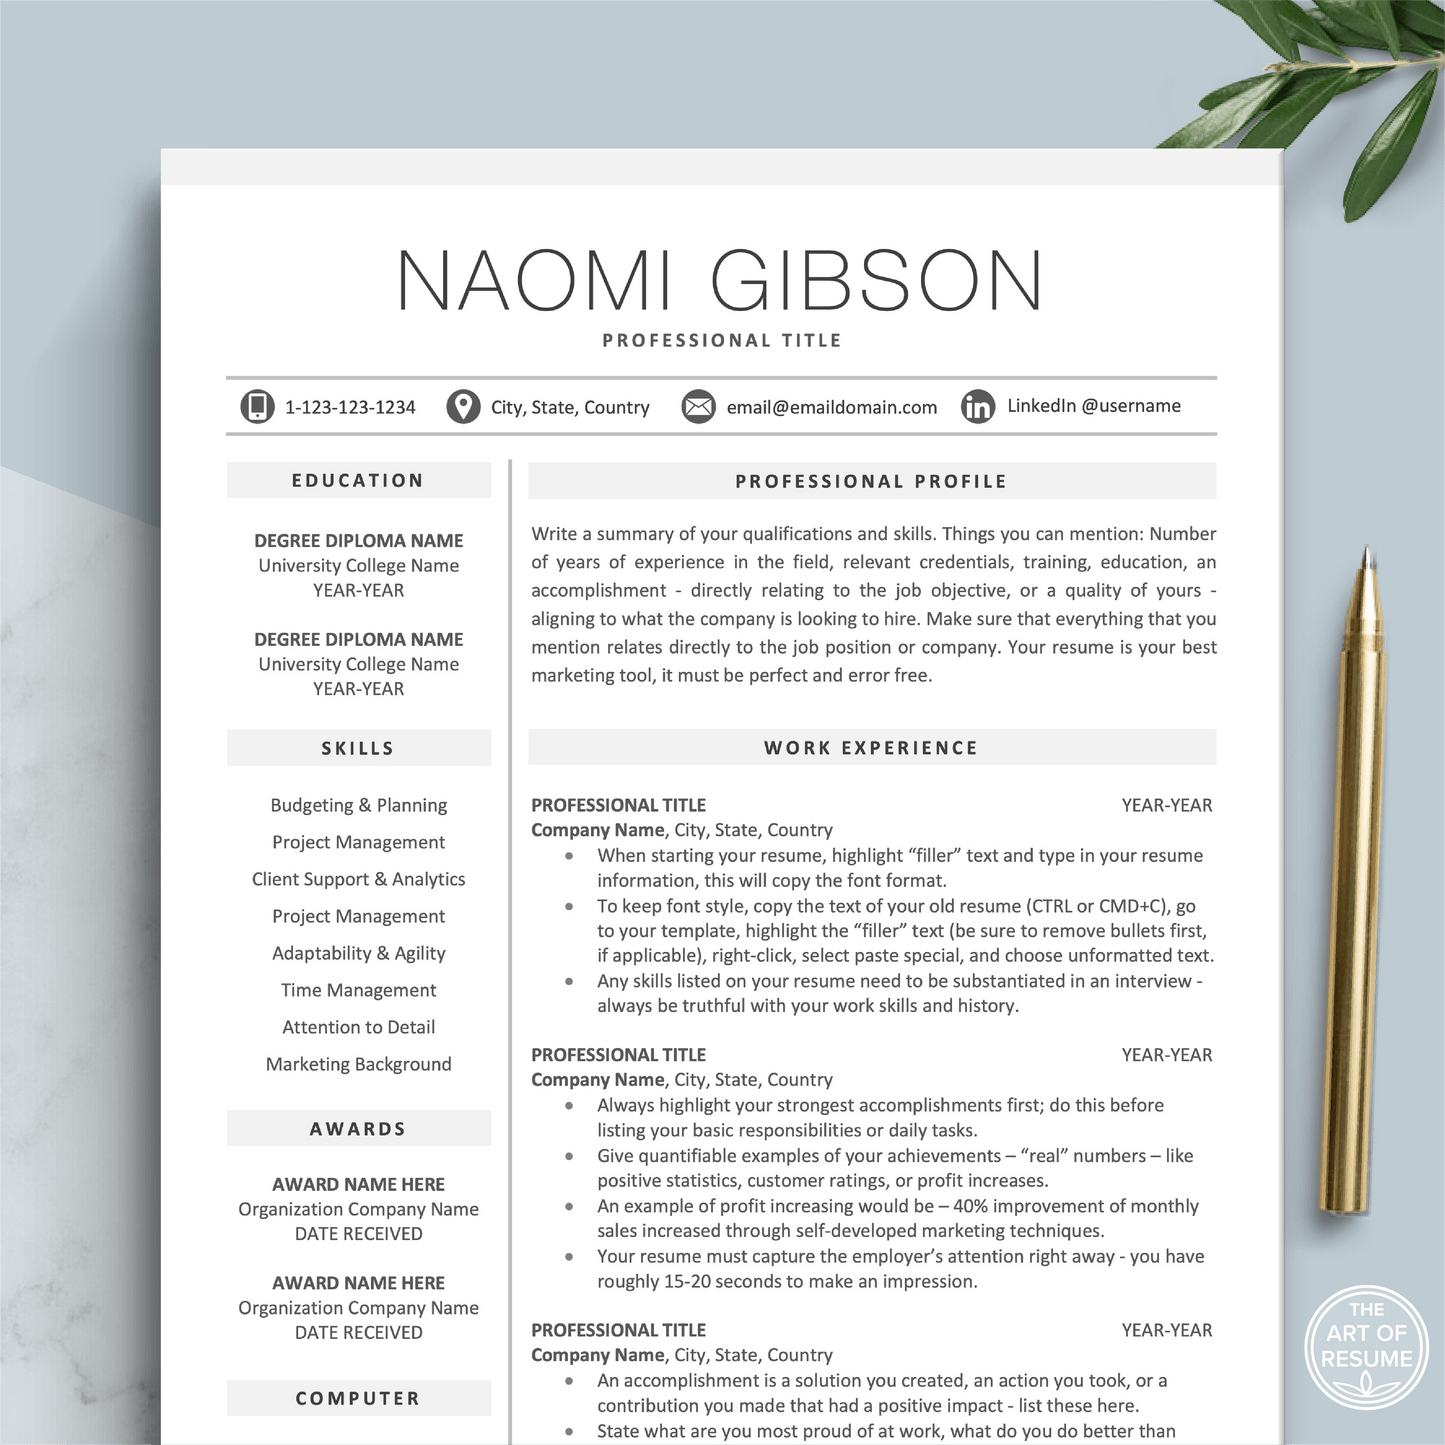 The Art of Resume Templates |  Professional Minimalist Simple Resume CV Template | Curriculum Vitae for Apple Pages, Microsoft Word, Mac, PC